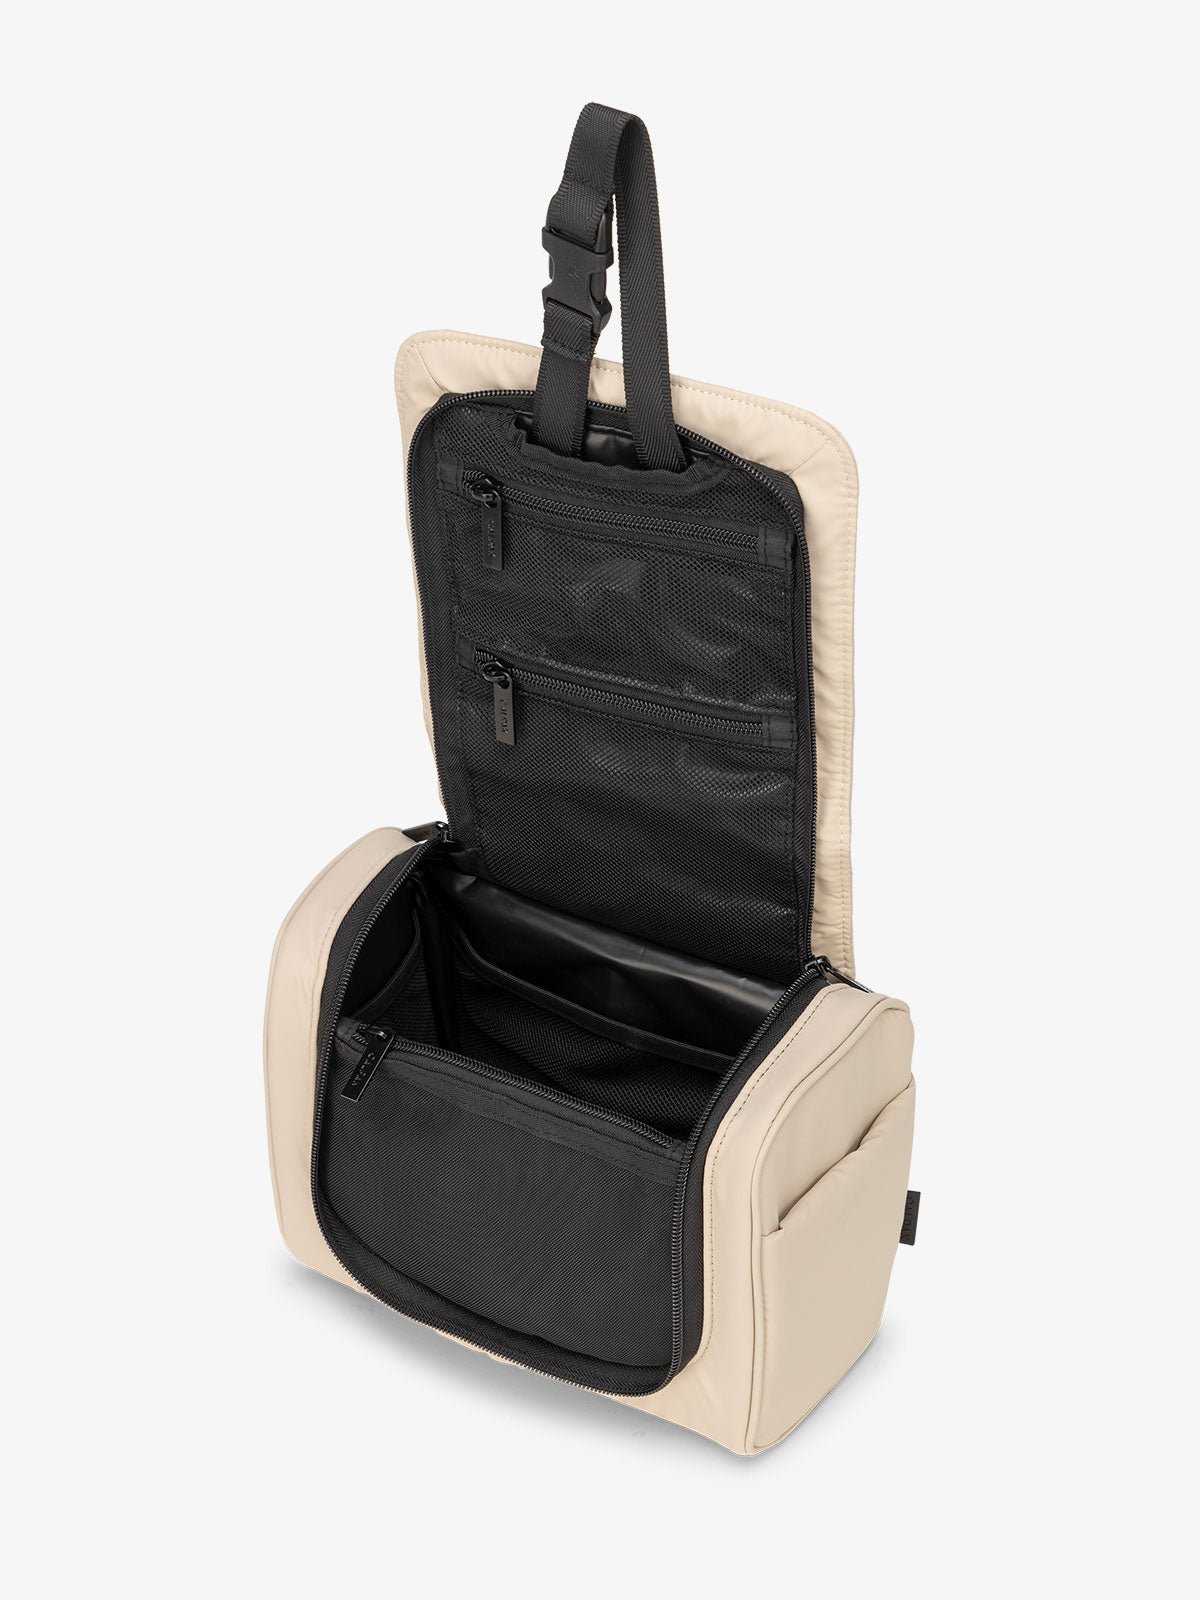 Luka Hanging Toiletry Bag with multiple interior pockets and retractable hanging strap in beige oatmeal